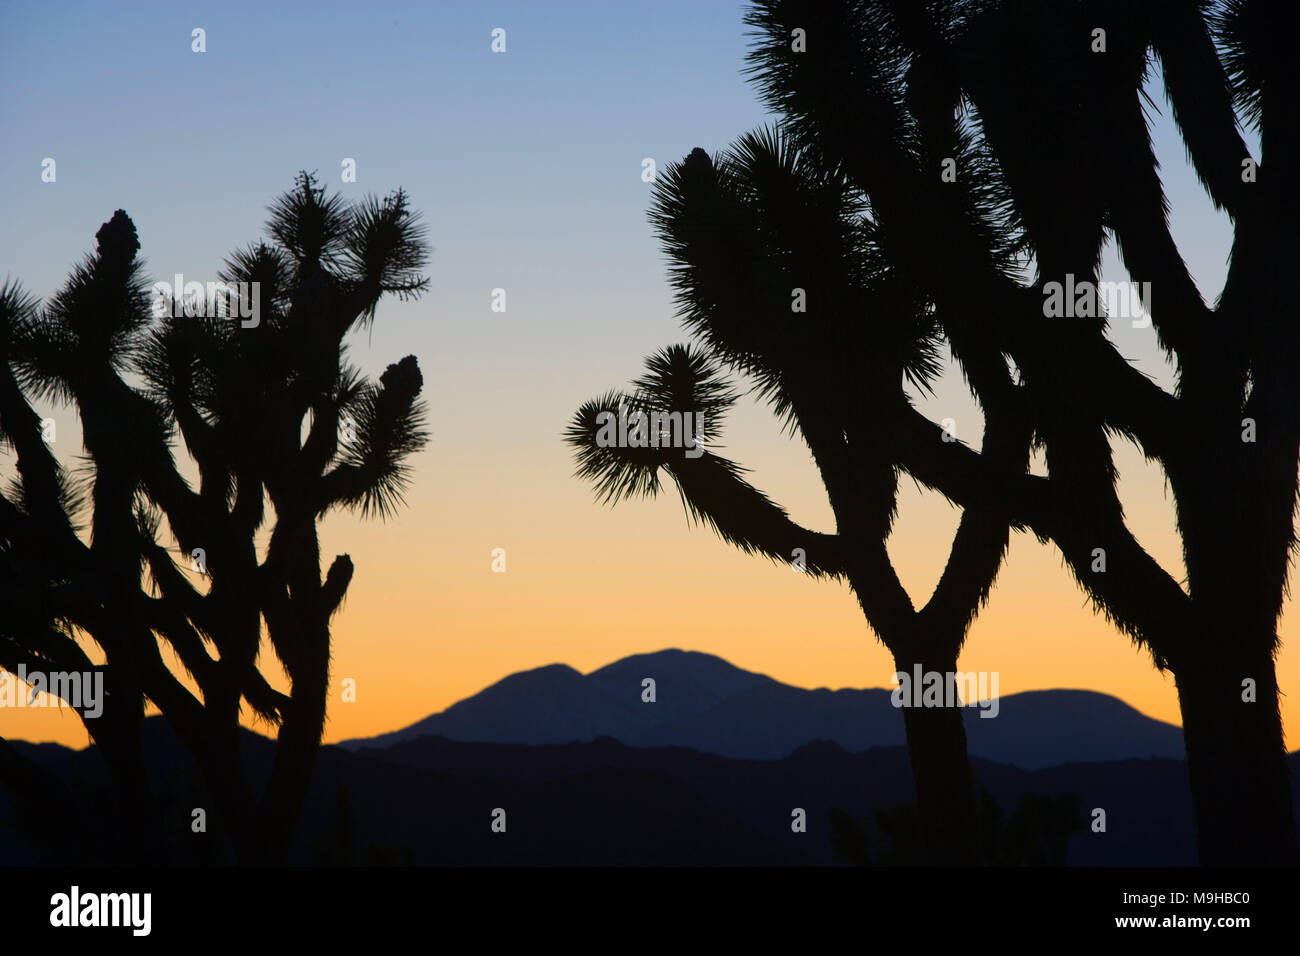 Sunset over the mountains in Joshua tree national Park in Southern California's Mojave desert Stock Photo